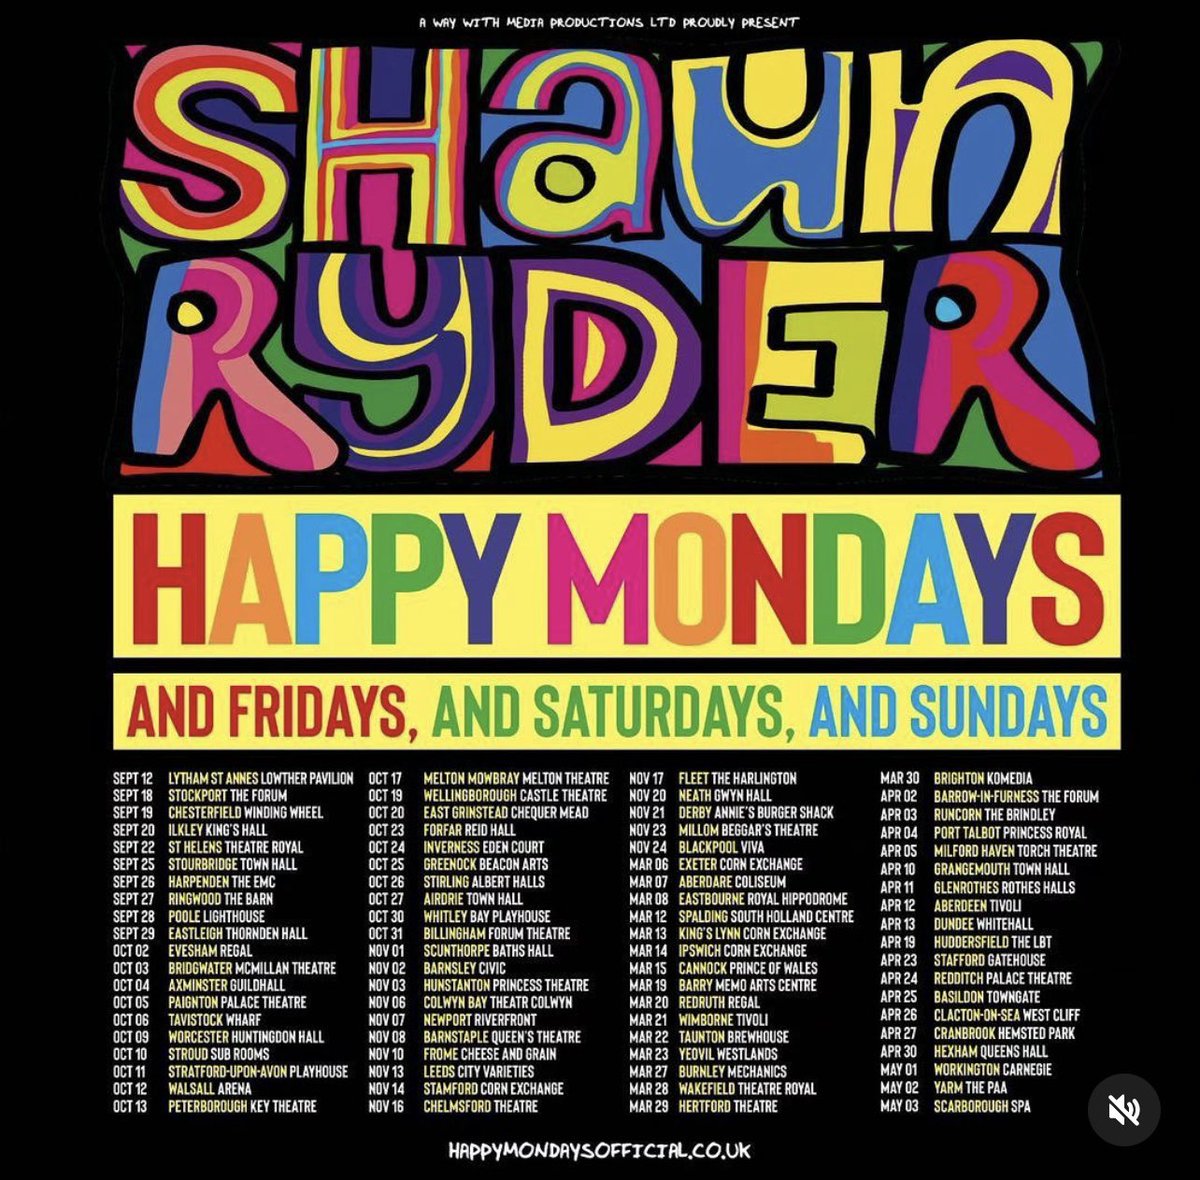 💥💥💥 New Q&A dates announced - tickets on sale NOW🎙️ Shaun Ryder - thrills, spills, and the best rock’n’roll stories of the past 30 years. Tickets: awaywithmedia.com/tours/shaun-ry… Hit the tours button and click on your local venue 👍🏻 #ShaunRyder #QandA #Tour @awaywithmedia